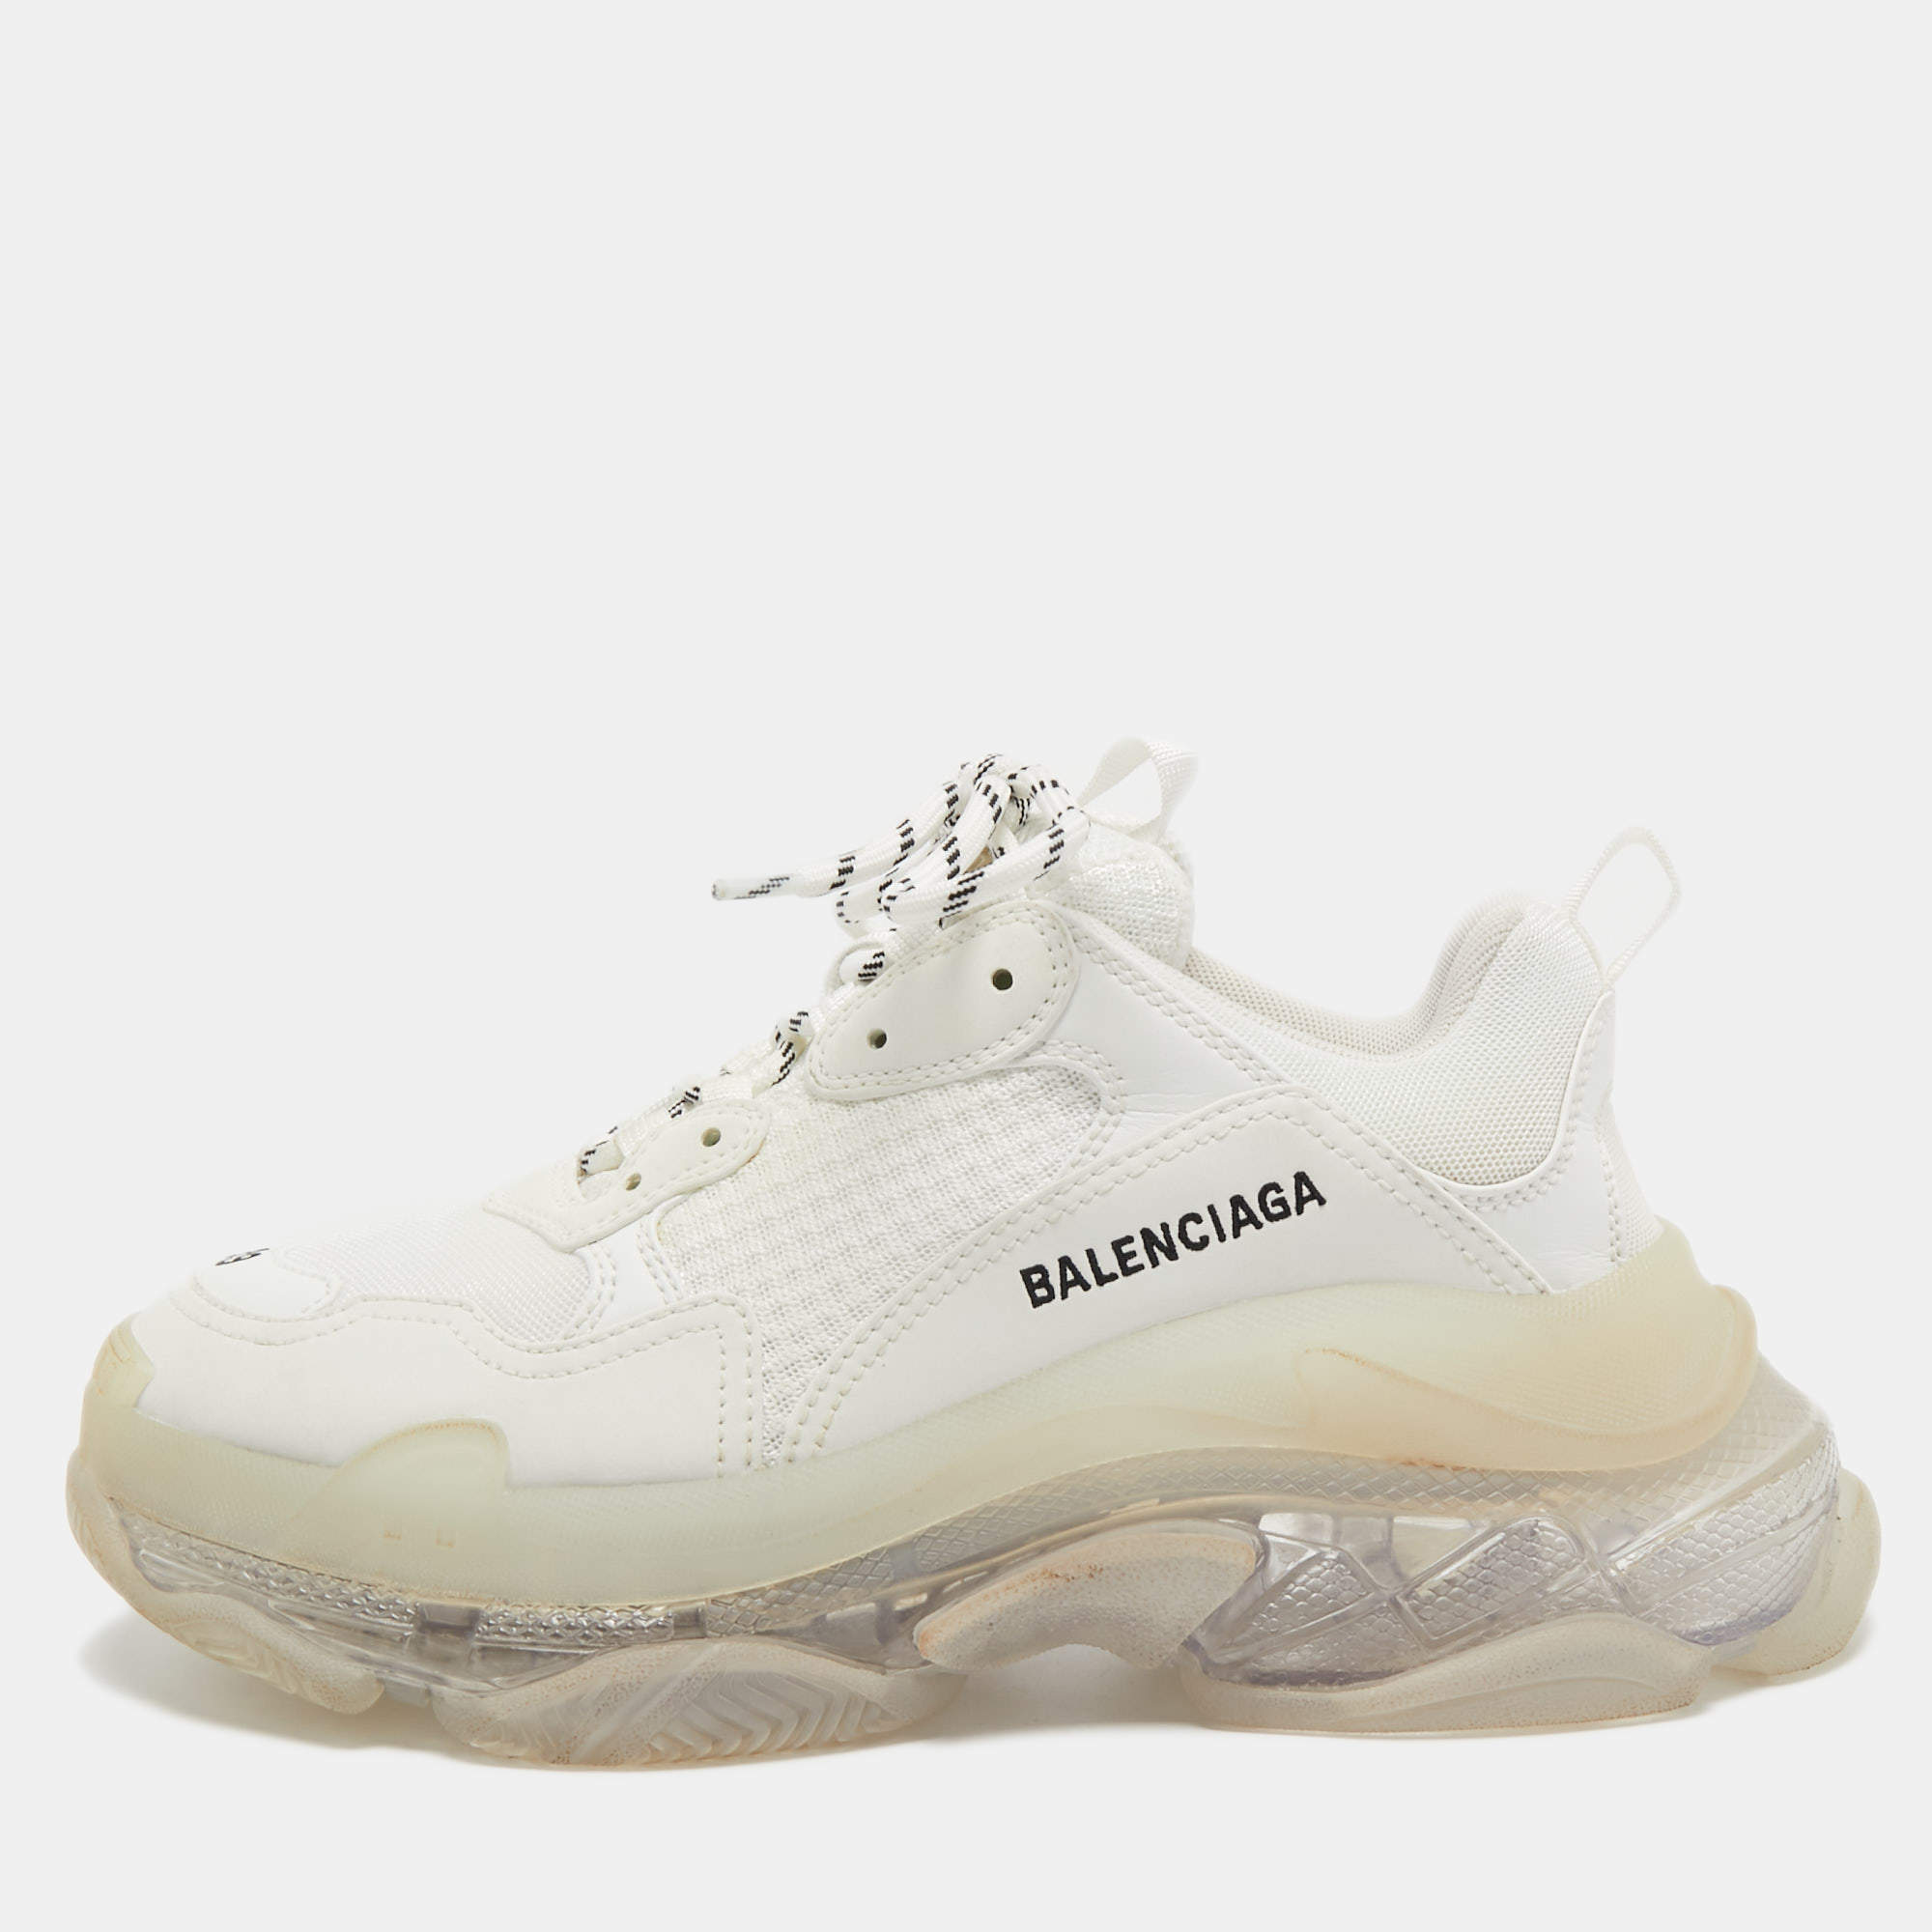 Balenciaga White Faux Leather and Mesh Triple S Sneakers Size 39